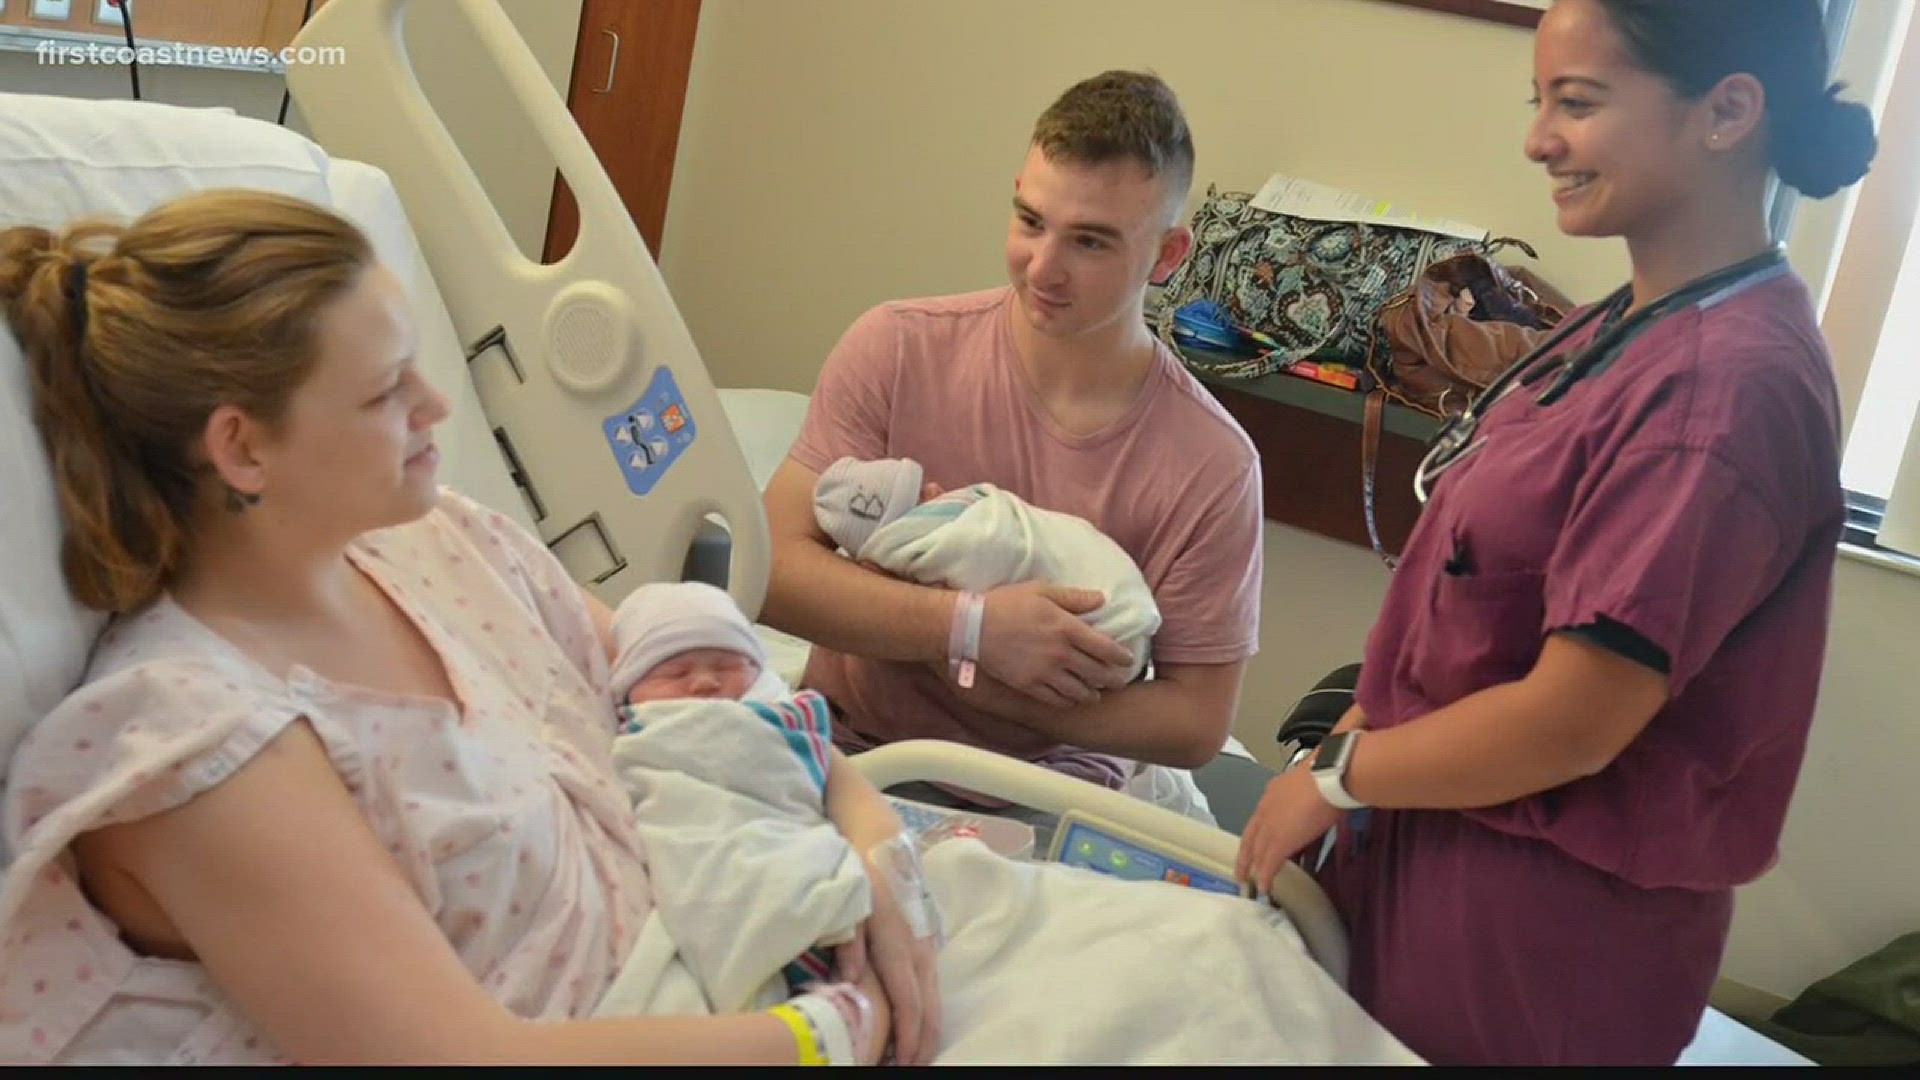 A Marine Corporal's wife gave birth to twins Friday at Naval Hospital Jacksonville while the couple was on evacuation from Florence.